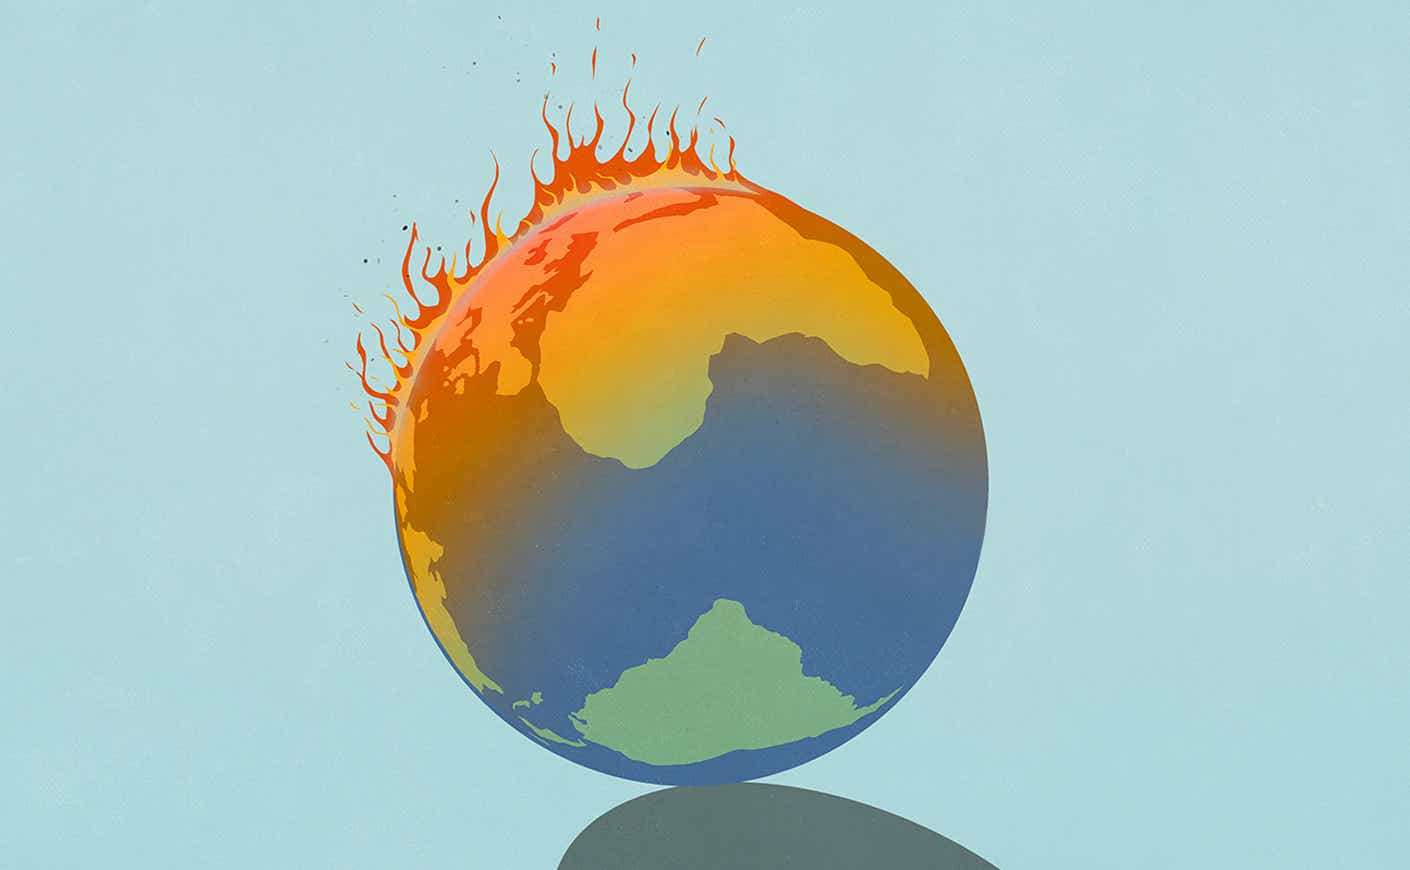 Illustration of the Earth on fire